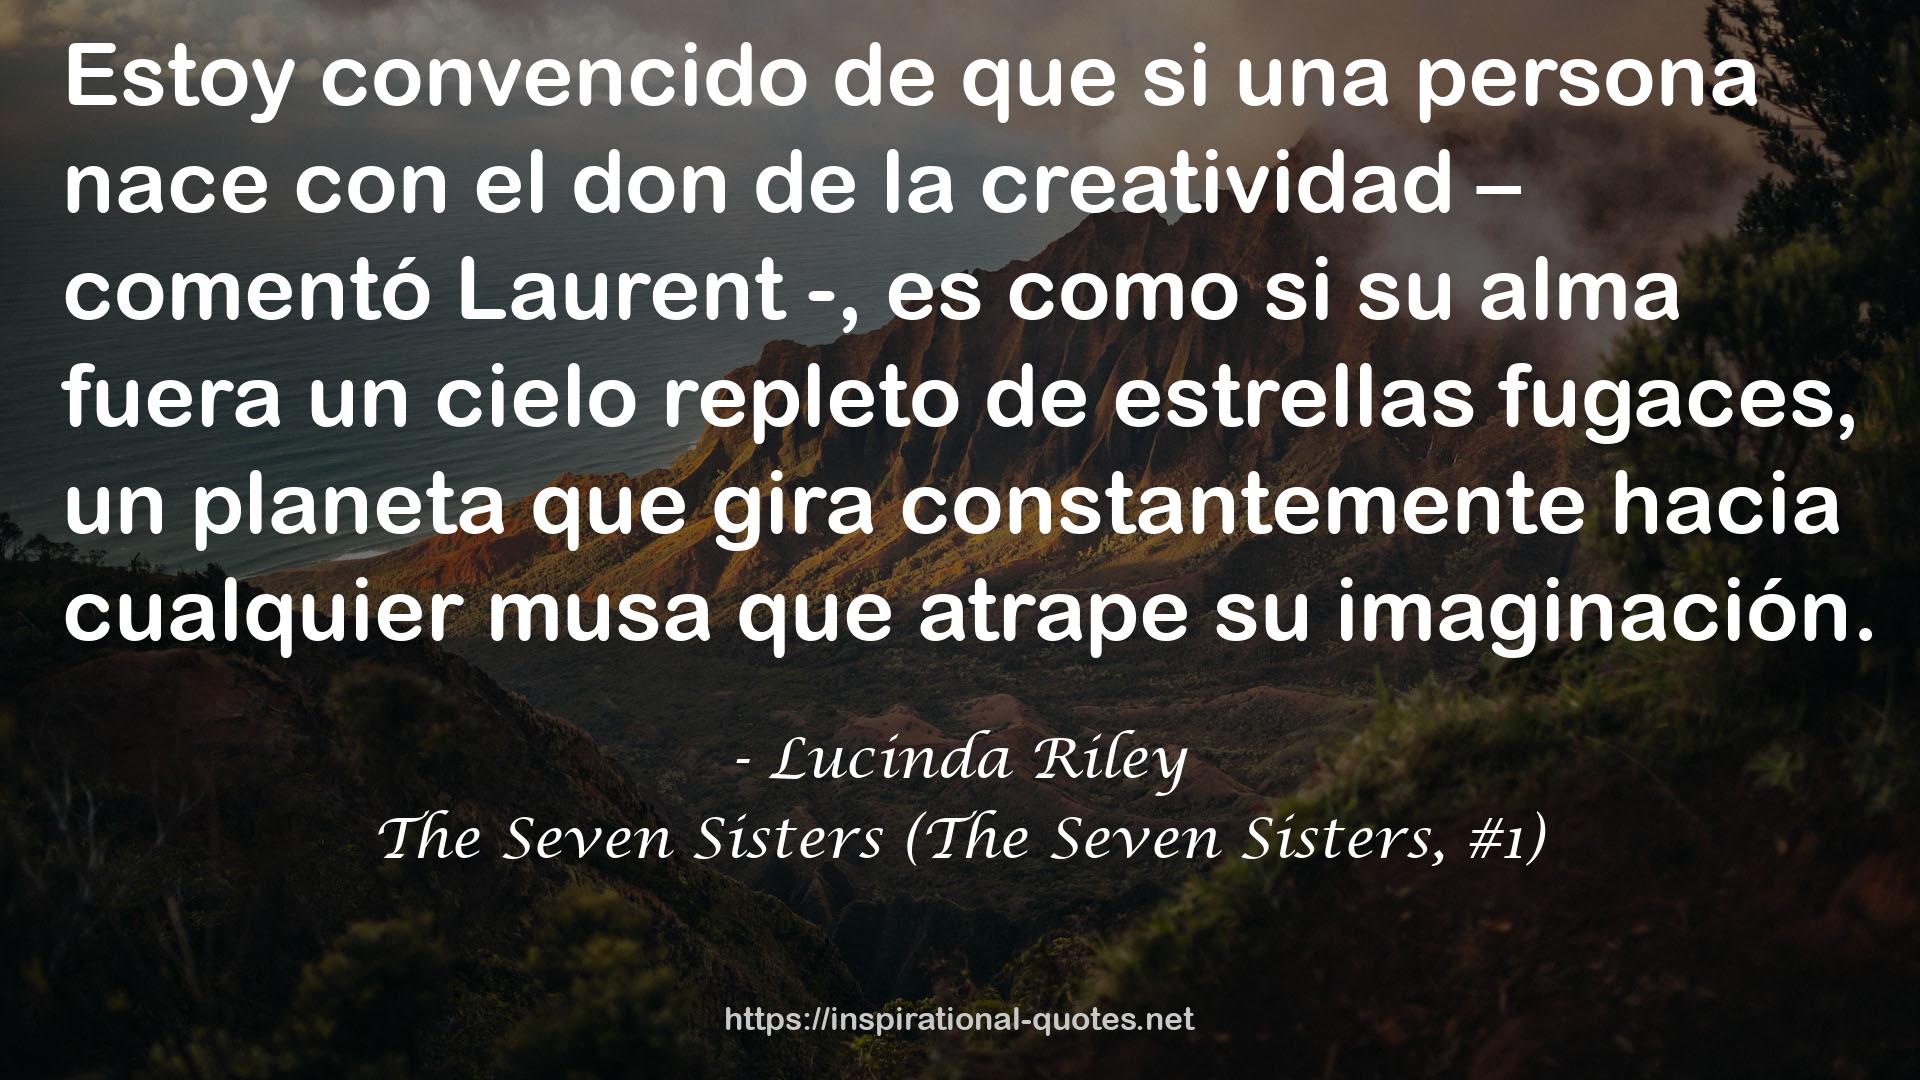 The Seven Sisters (The Seven Sisters, #1) QUOTES